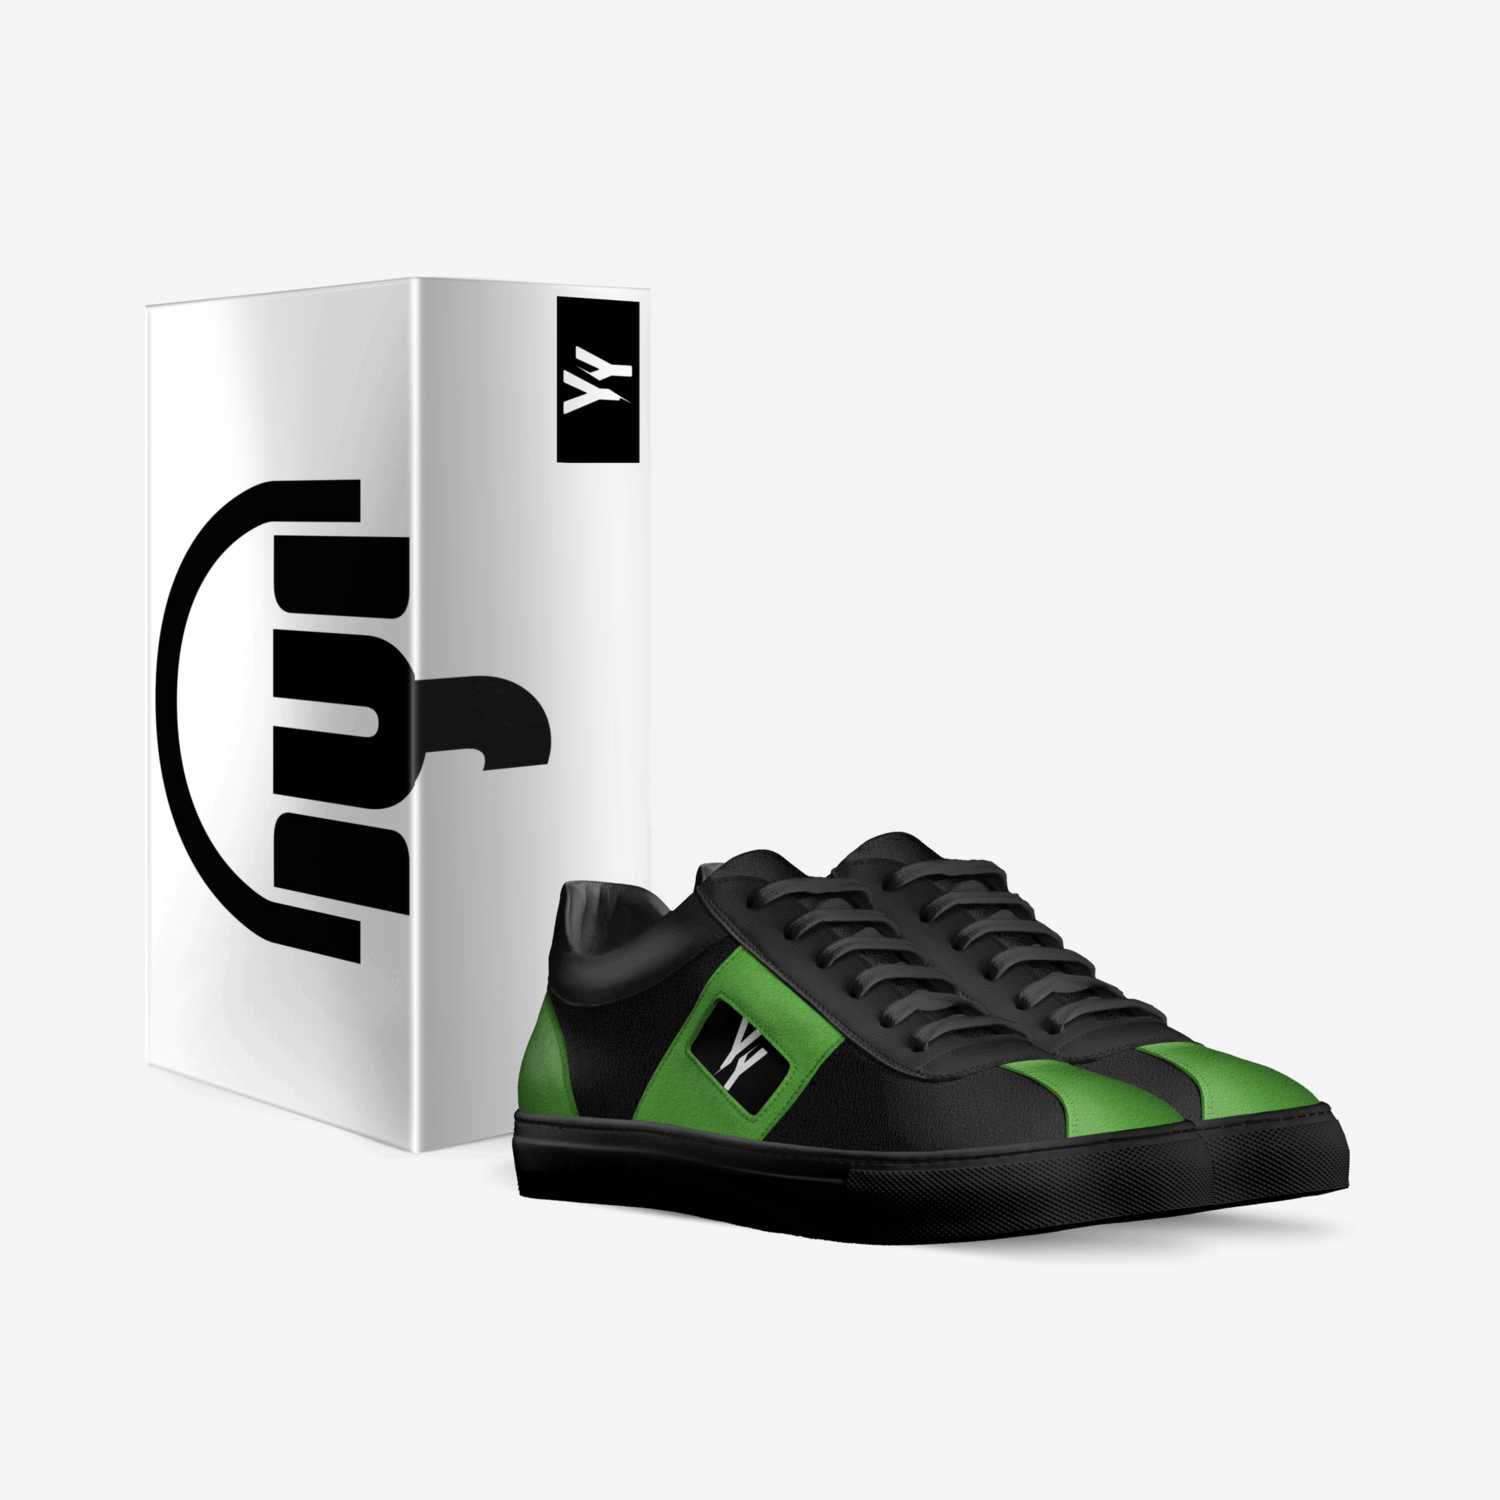 YunYea1.24 custom made in Italy shoes by Roye Strawder | Box view